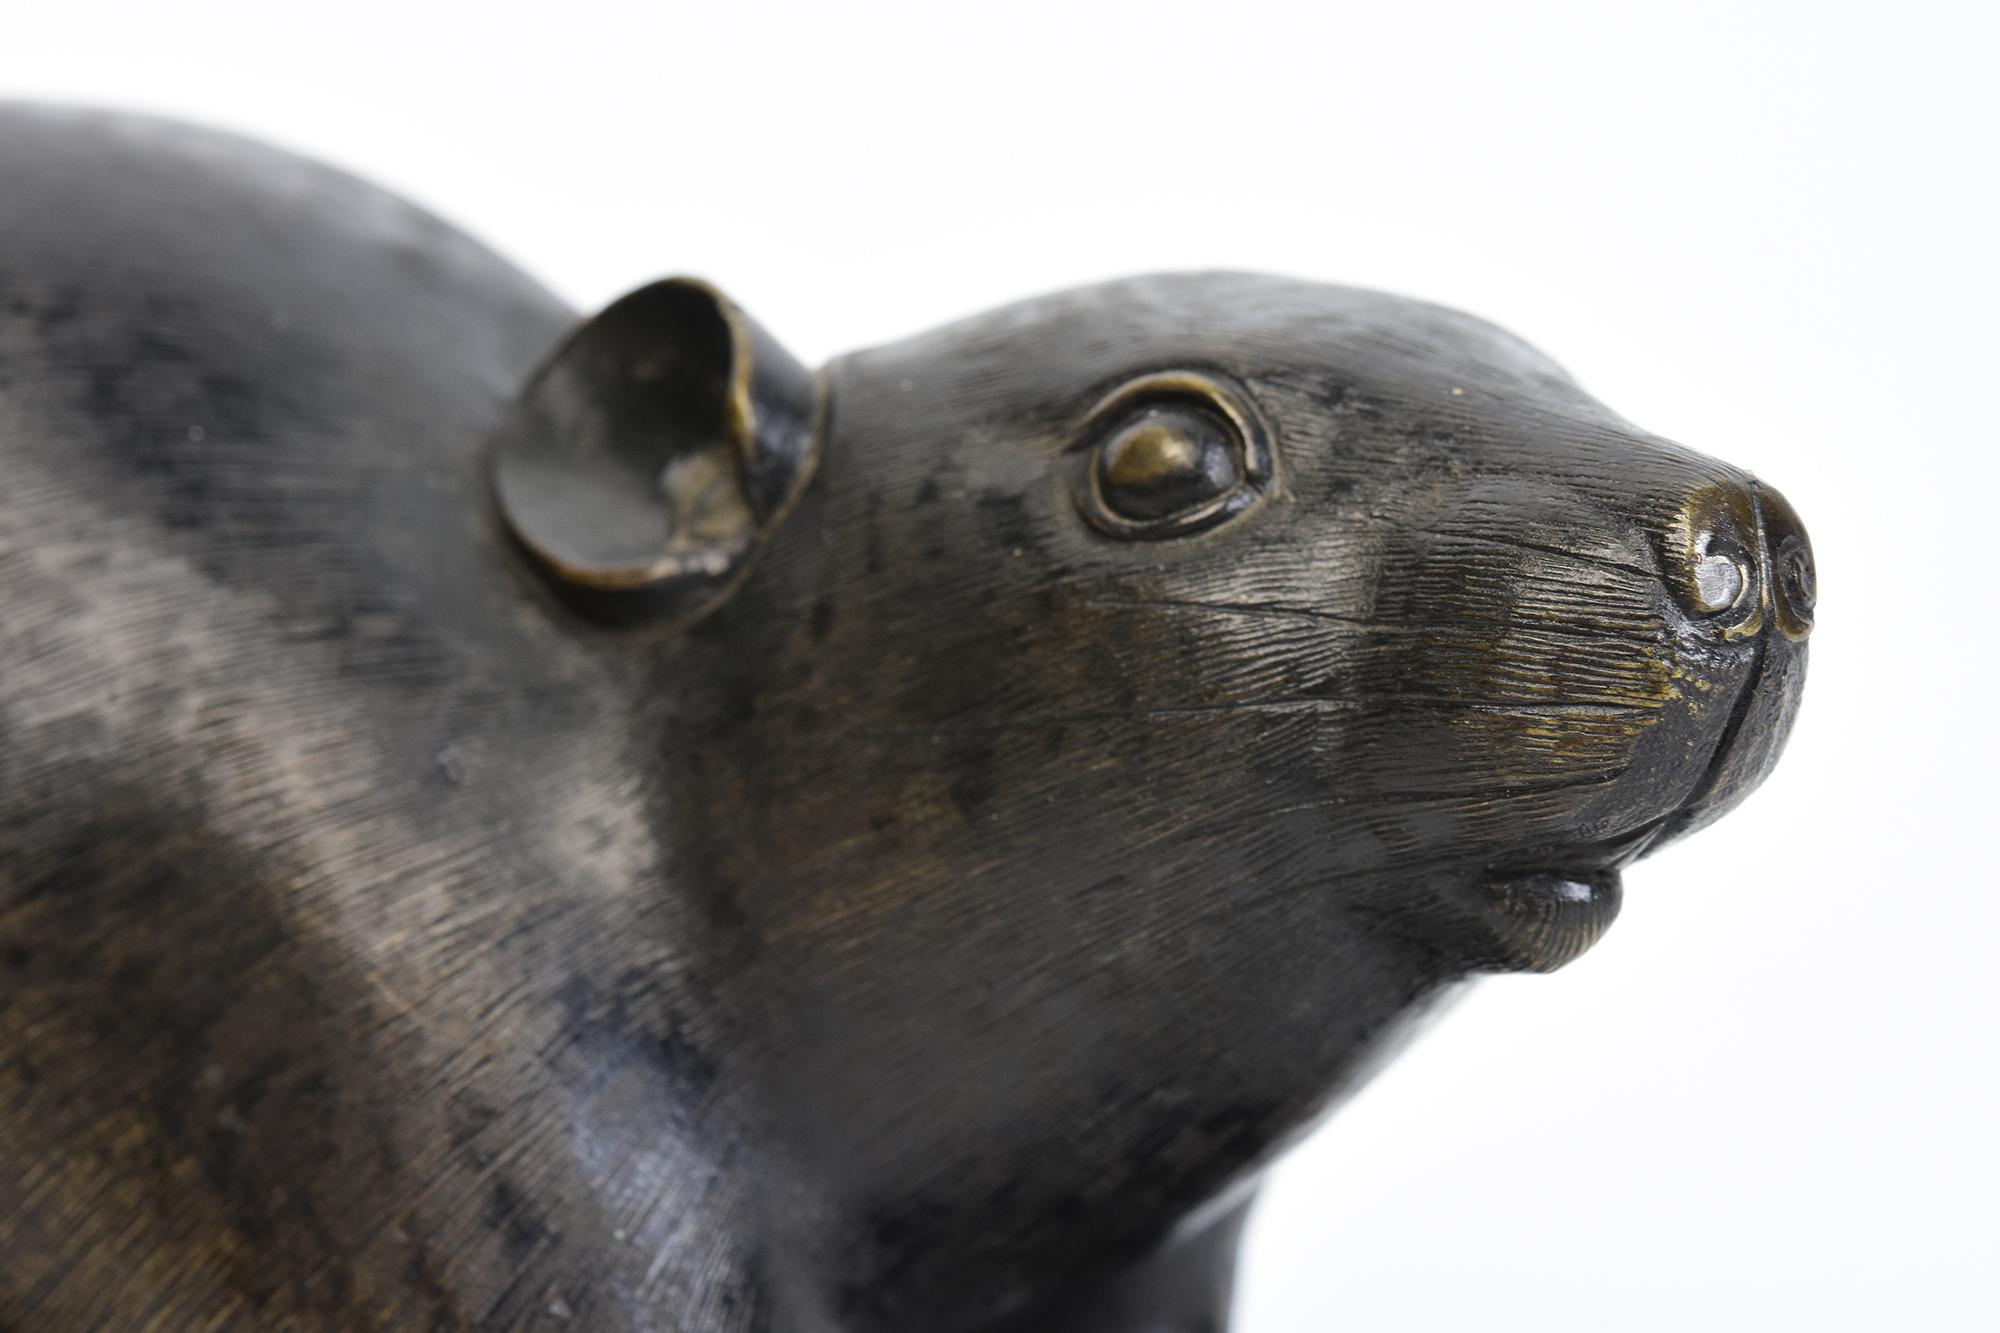 Japanese bronze animal rat / mouse holding a chestnut with artist sign.
Artist signature is on the last photo.

Age: Japan, Meiji Period, 19th Century
Size: Length 18 C.M. / Width 8.5 C.M. / Height 9 C.M.
Condition: Nice condition